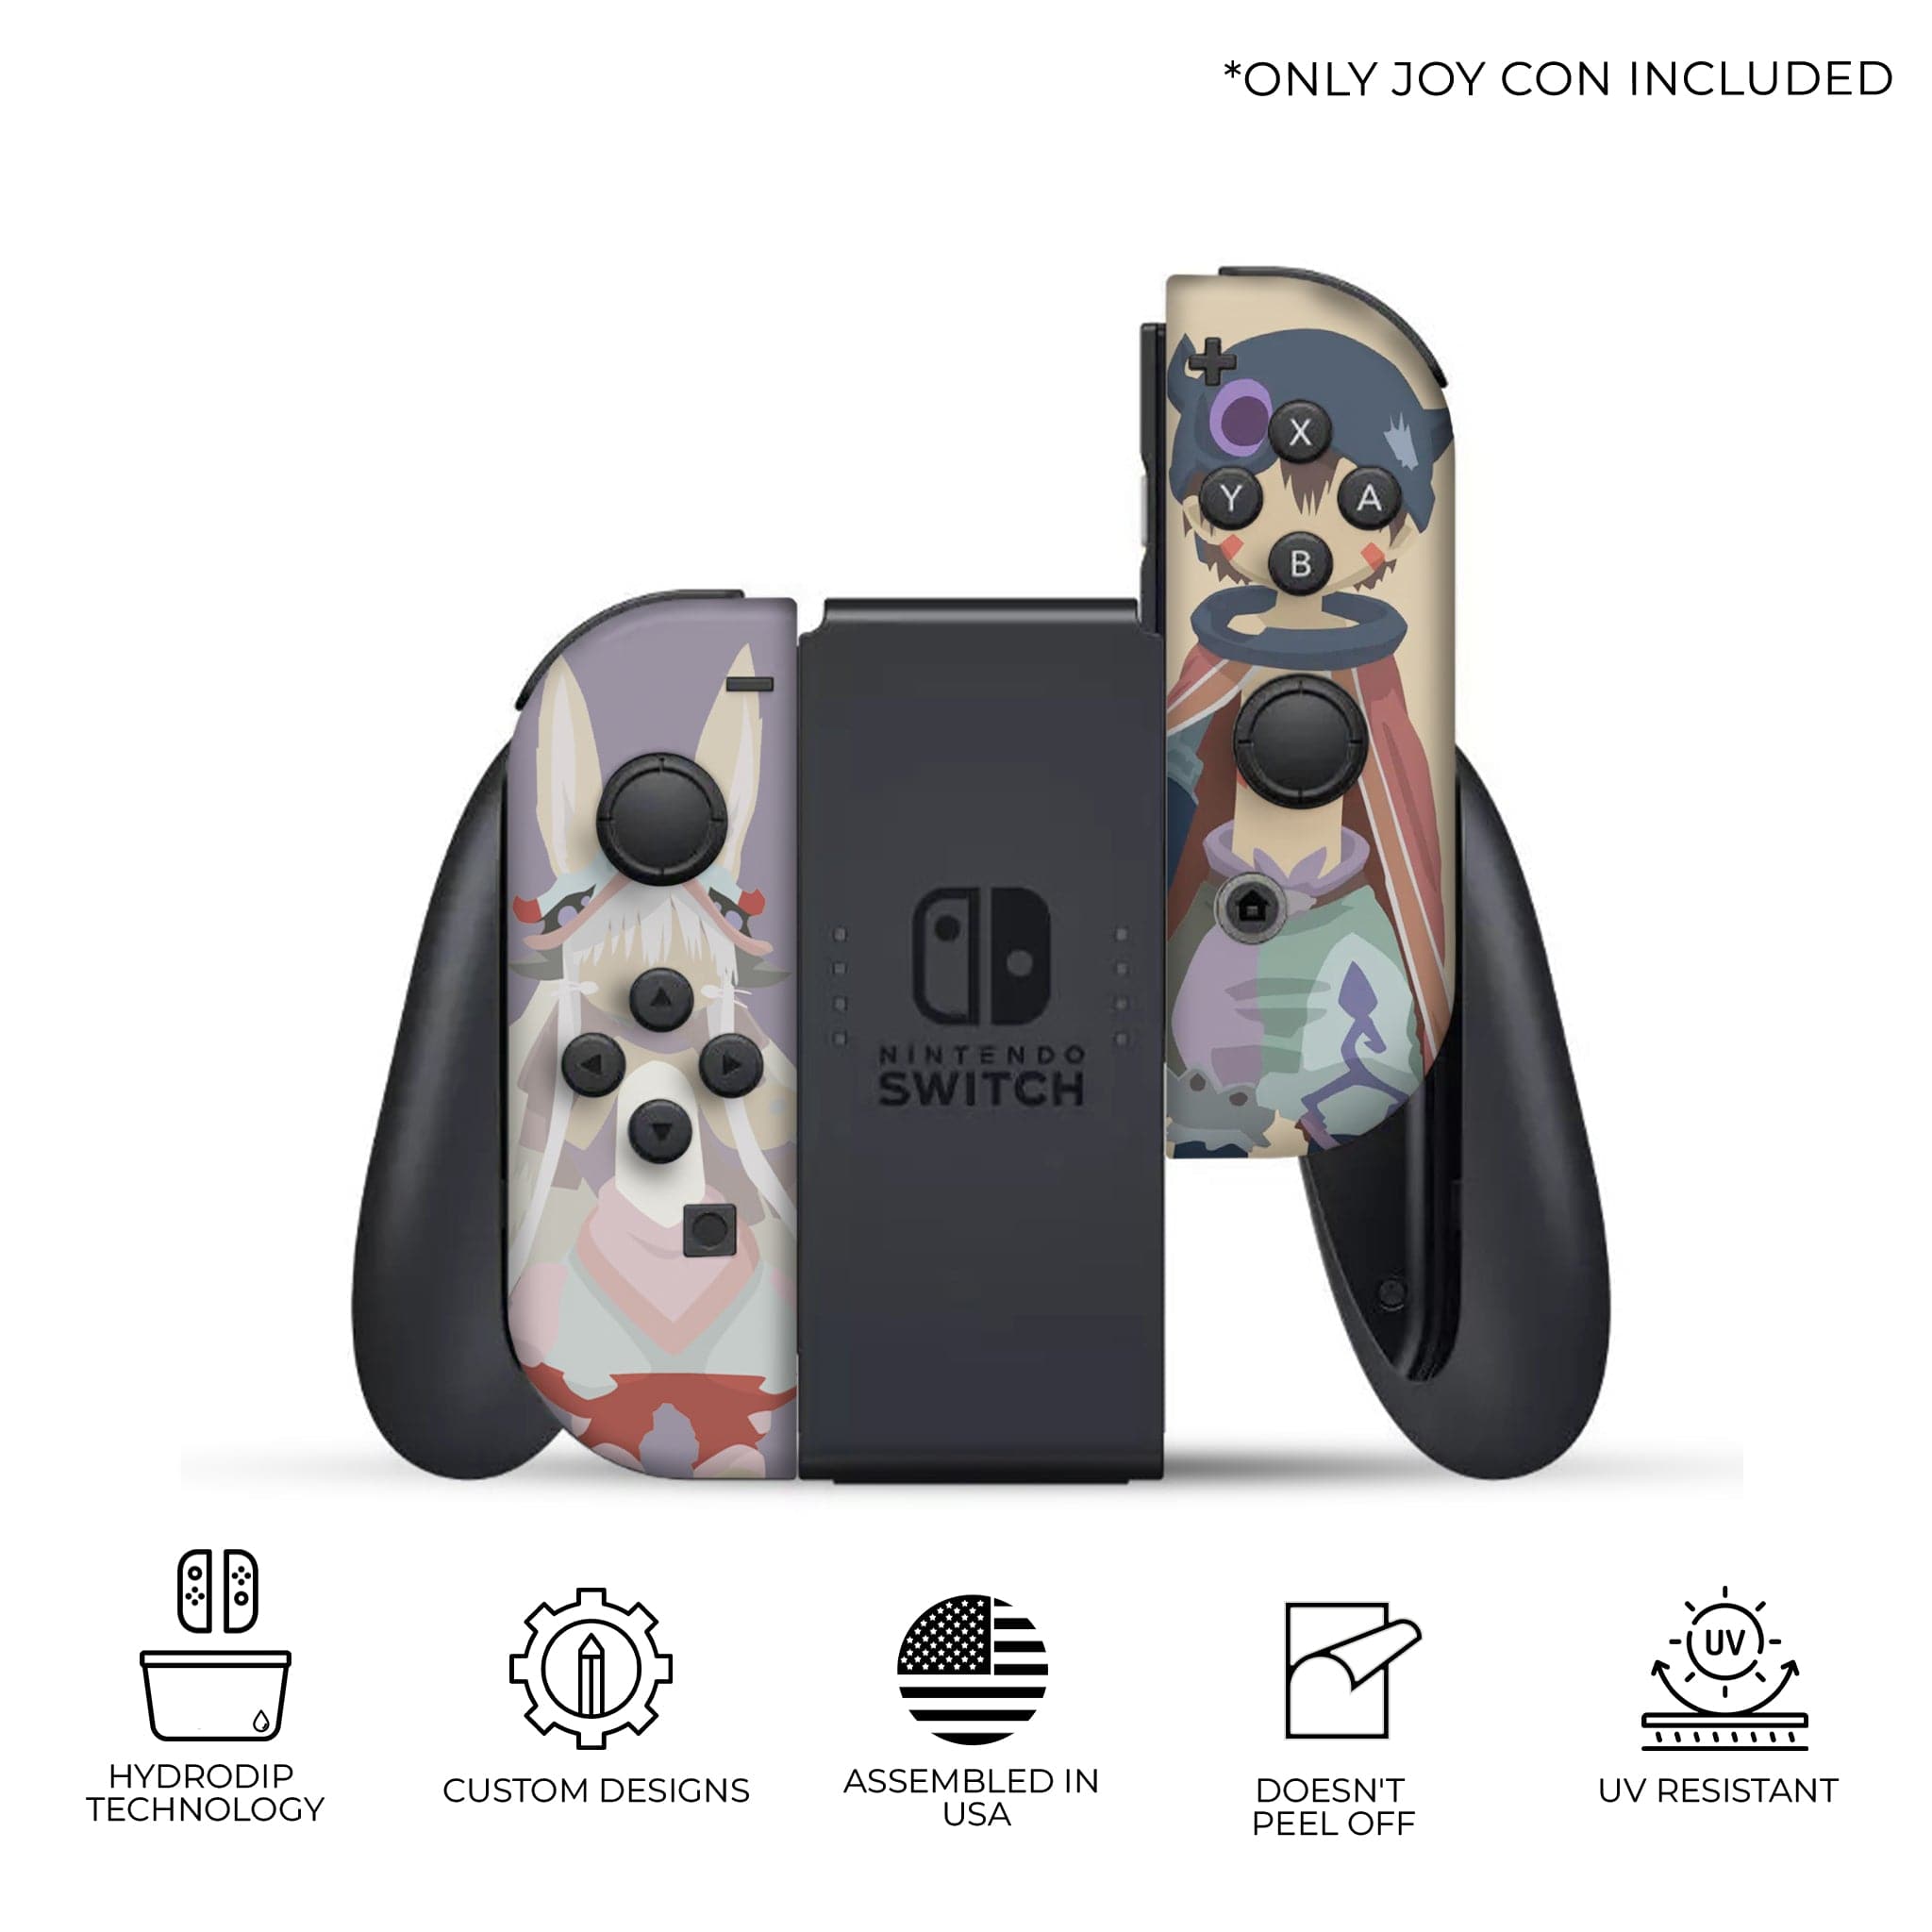 Made in Abyss Inspired Nintendo Switch Joy-Con Left and Right Switch Controllers